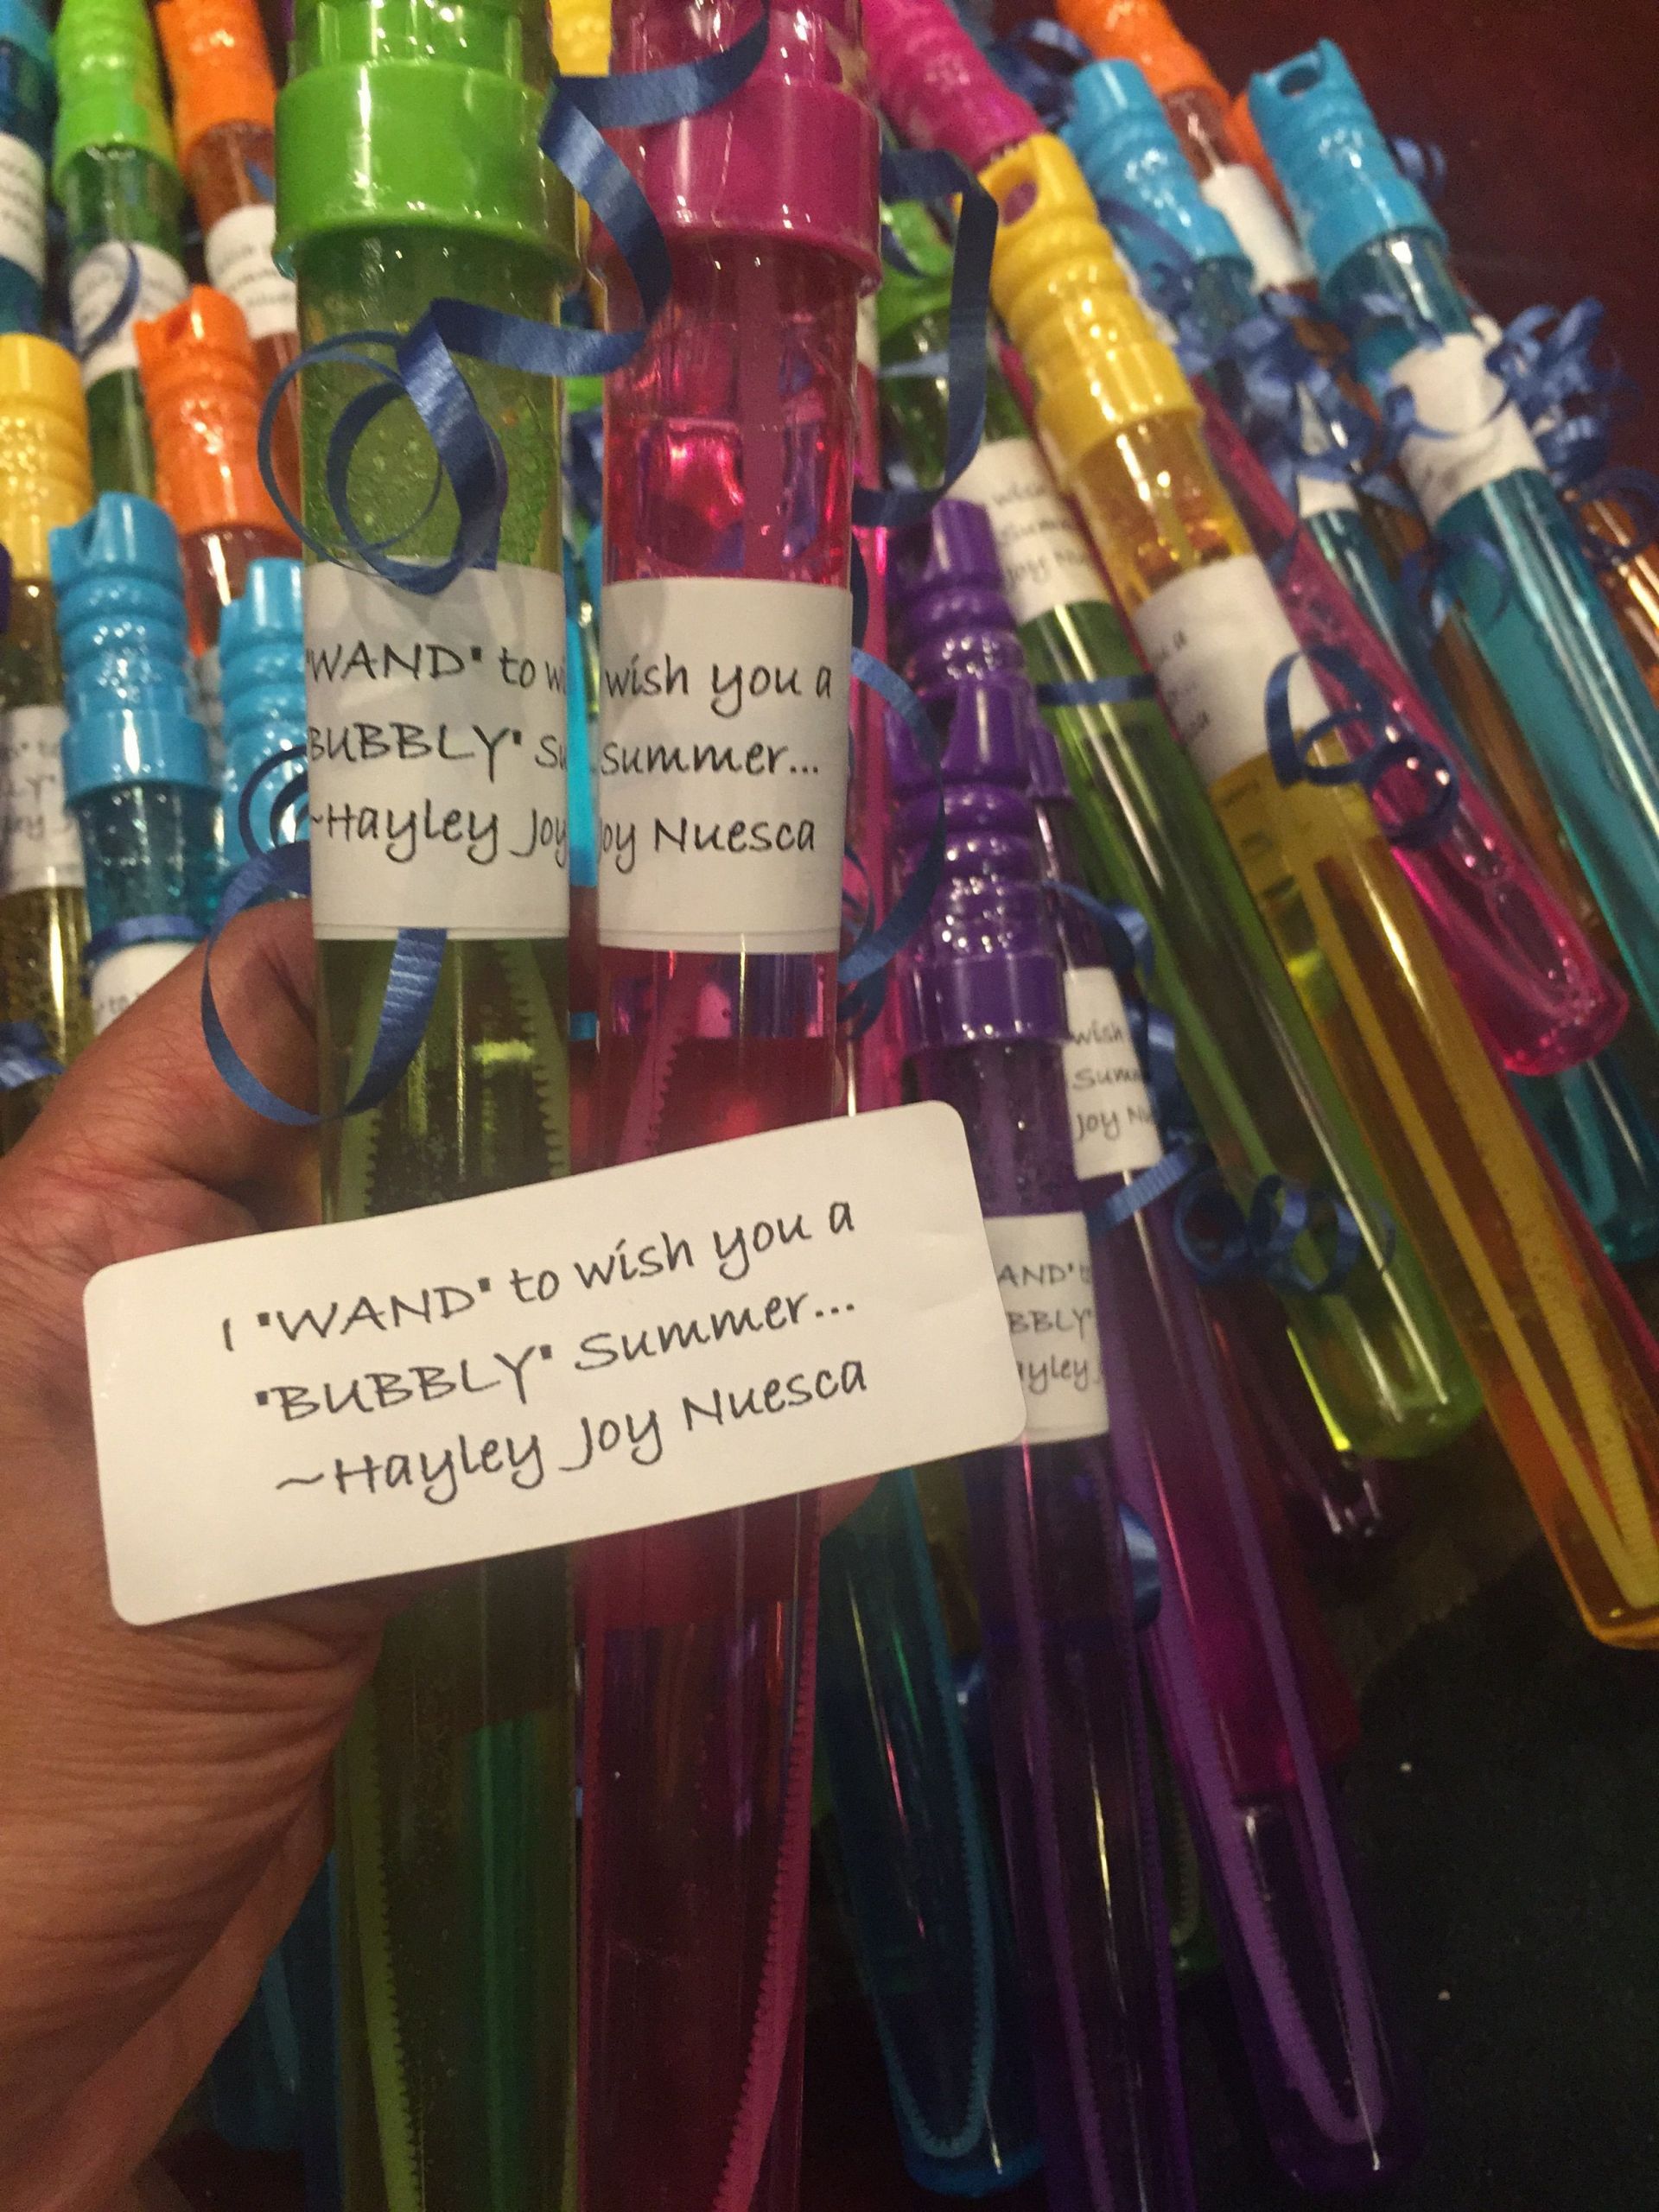 Kindergarten Graduation Gift Ideas For Classmates
 Bubble wands for end of the school year classmates ts